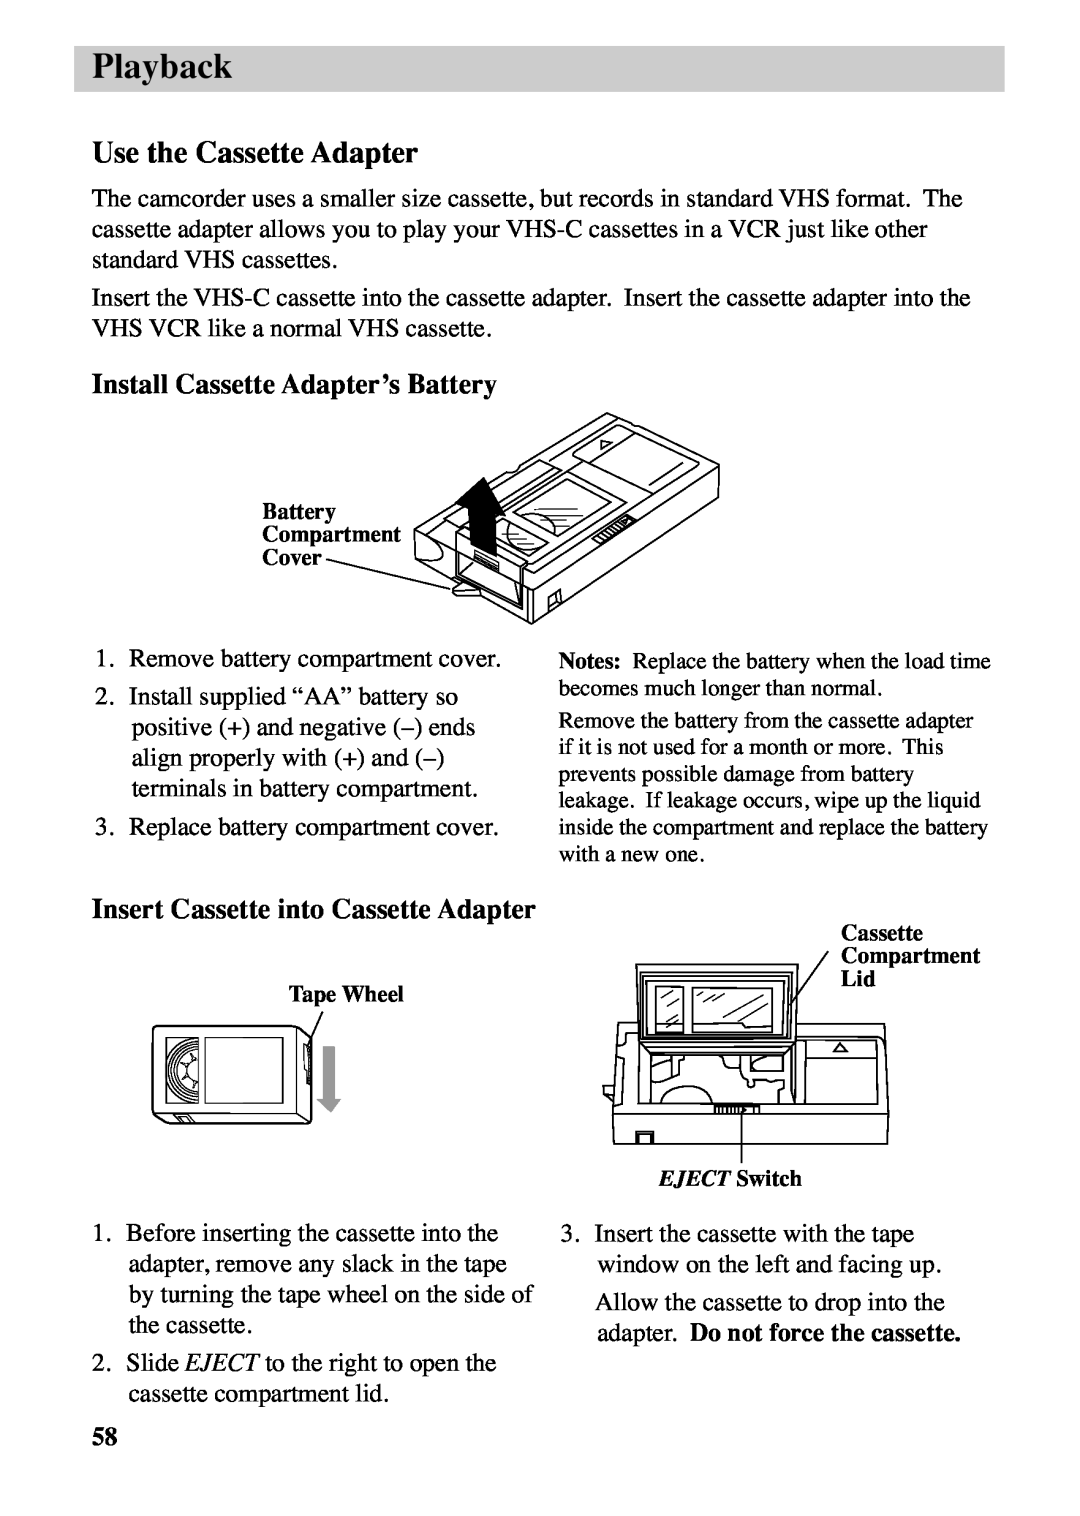 RCA CC6263 Use the Cassette Adapter, Install Cassette Adapter’s Battery, Insert Cassette into Cassette Adapter, Playback 